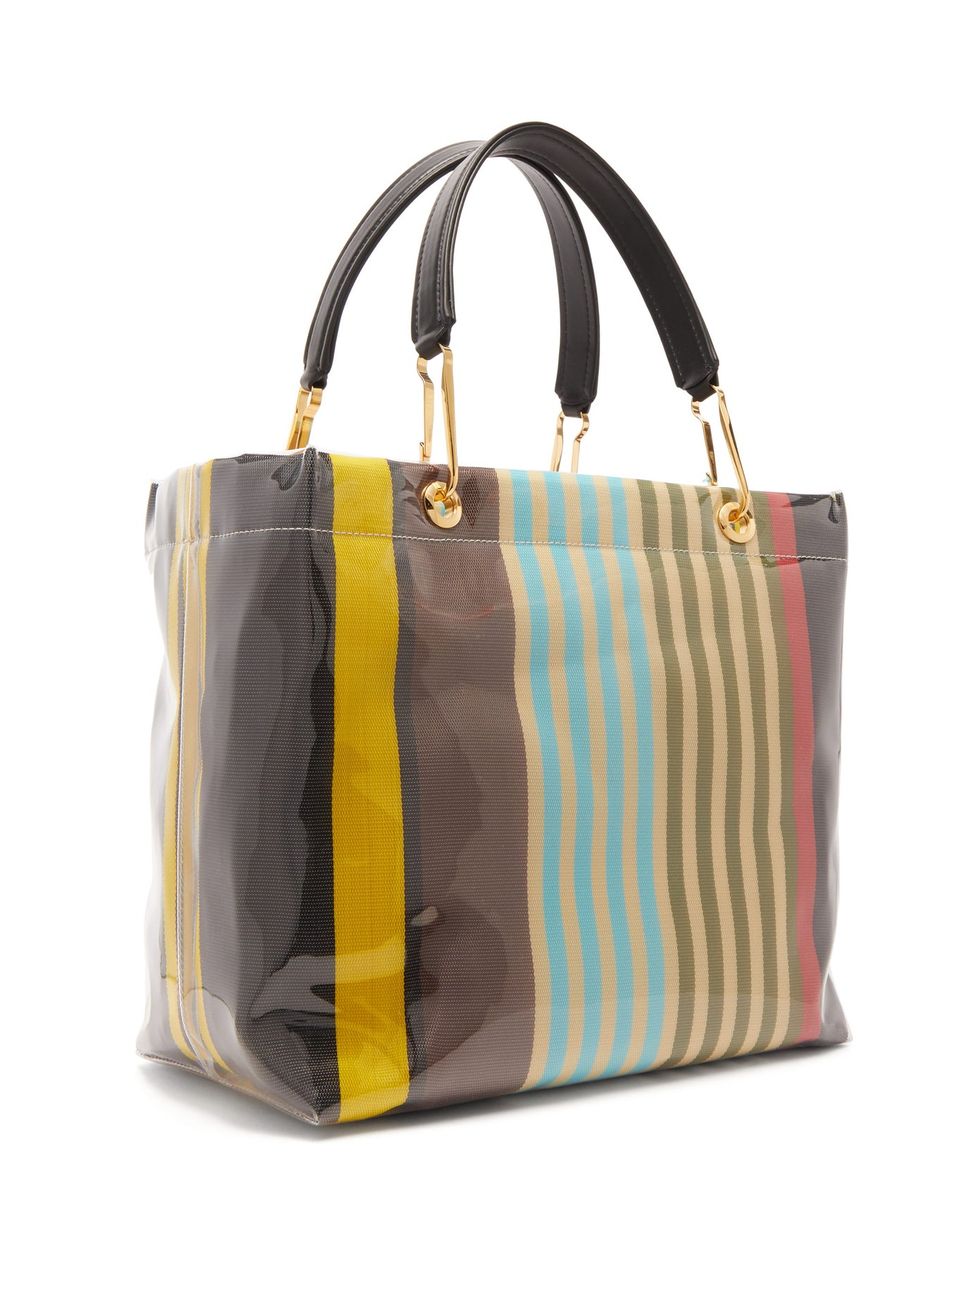 Handbag, Bag, Tote bag, Yellow, Fashion accessory, Brown, Shoulder bag, Beige, Luggage and bags, Material property, 